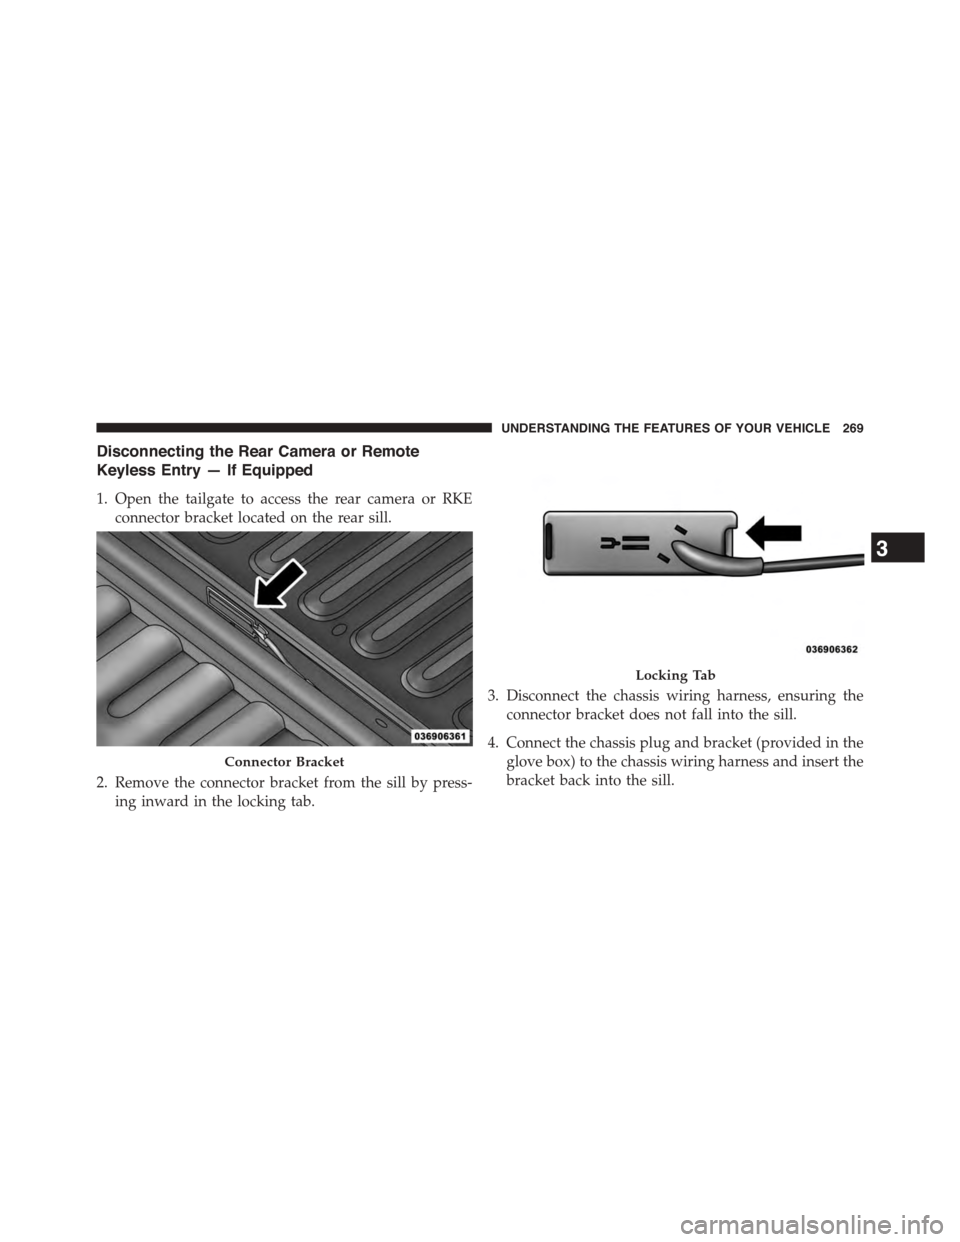 Ram 1500 2015  Owners Manual Disconnecting the Rear Camera or Remote
Keyless Entry — If Equipped
1. Open the tailgate to access the rear camera or RKE
connector bracket located on the rear sill.
2. Remove the connector bracket 